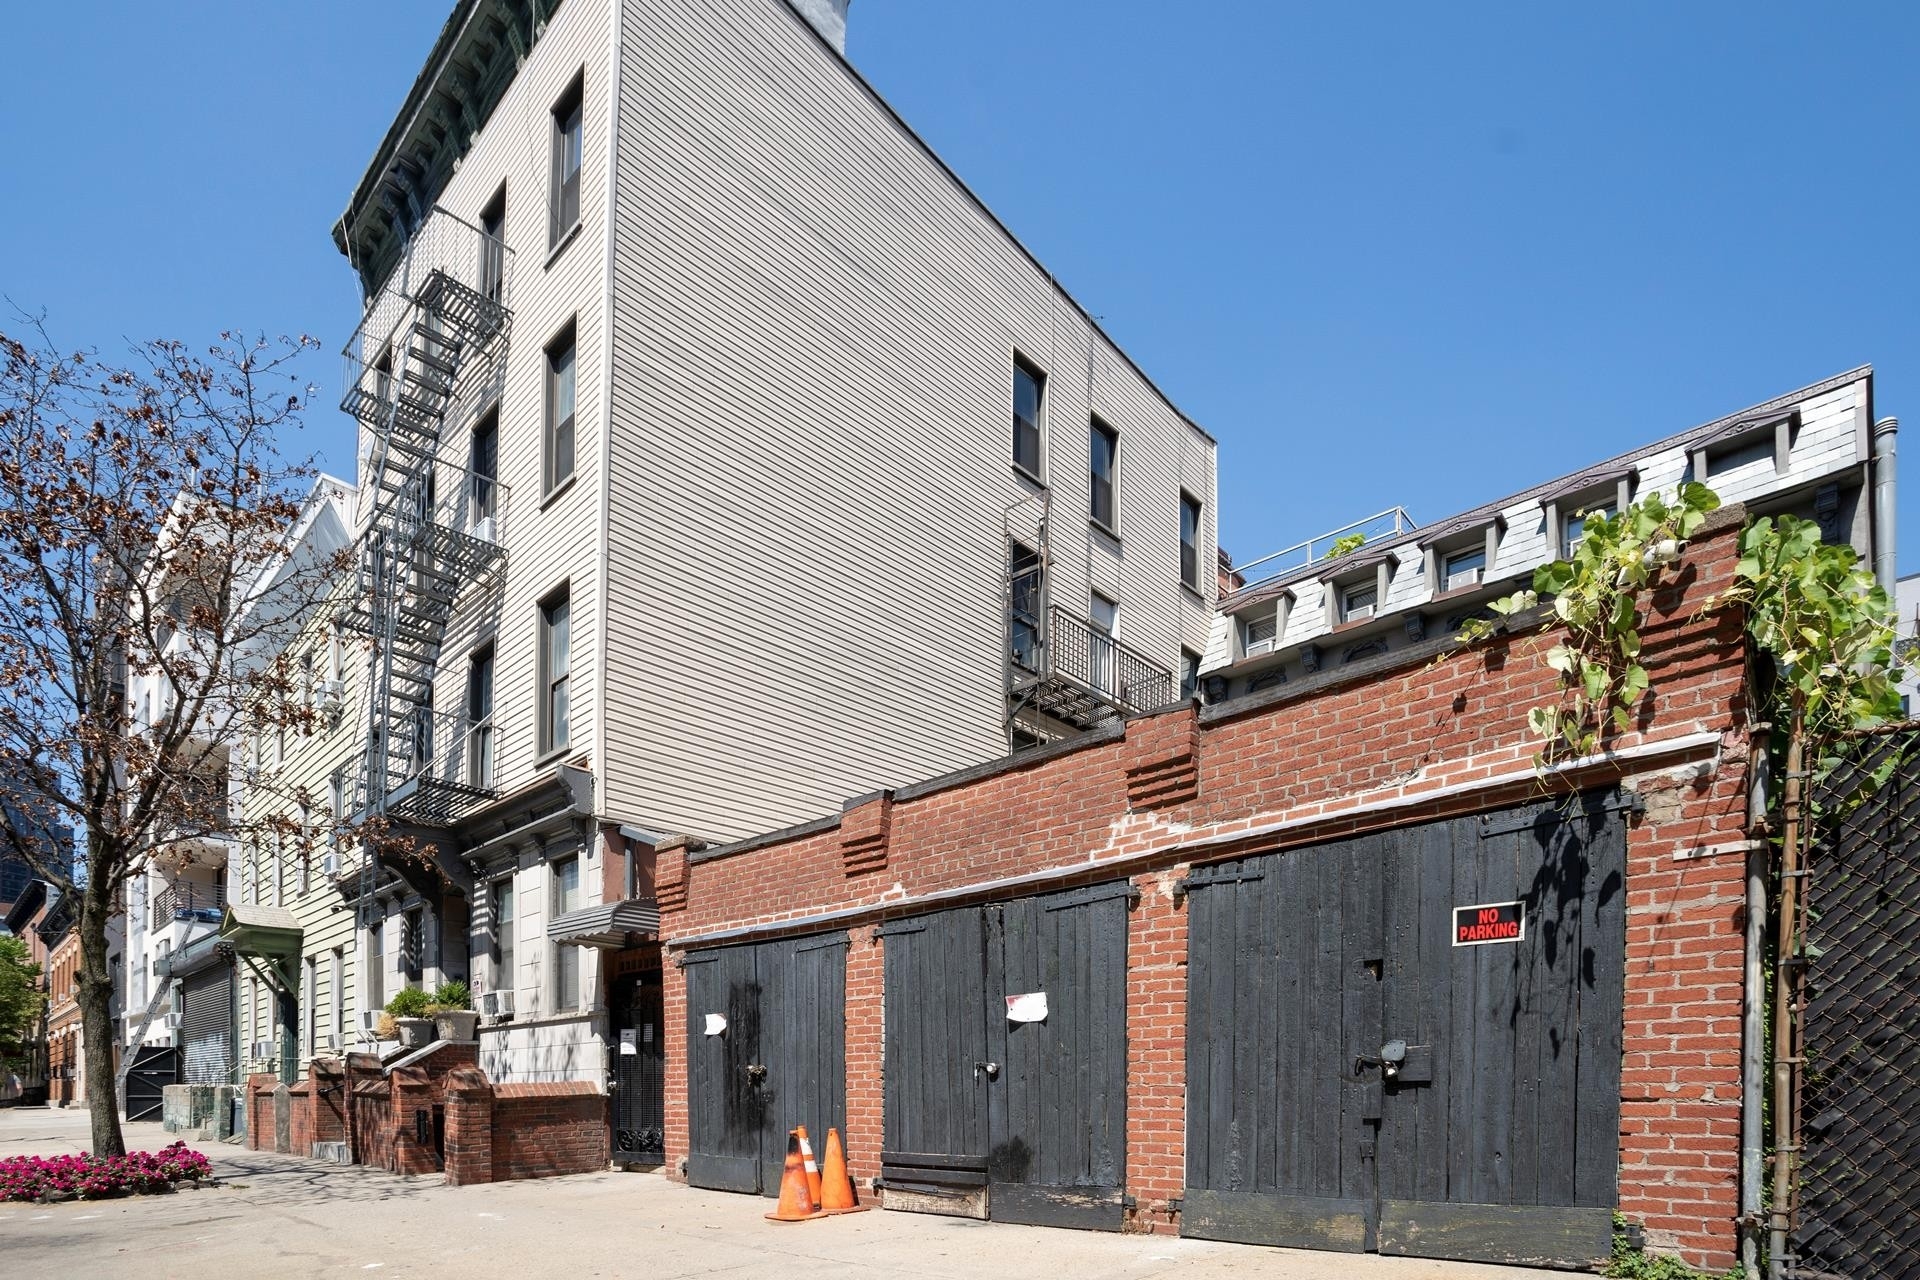 1. Single Family Townhouse for Sale at 85 CLAY ST, BLDG Greenpoint, Brooklyn, NY 11222